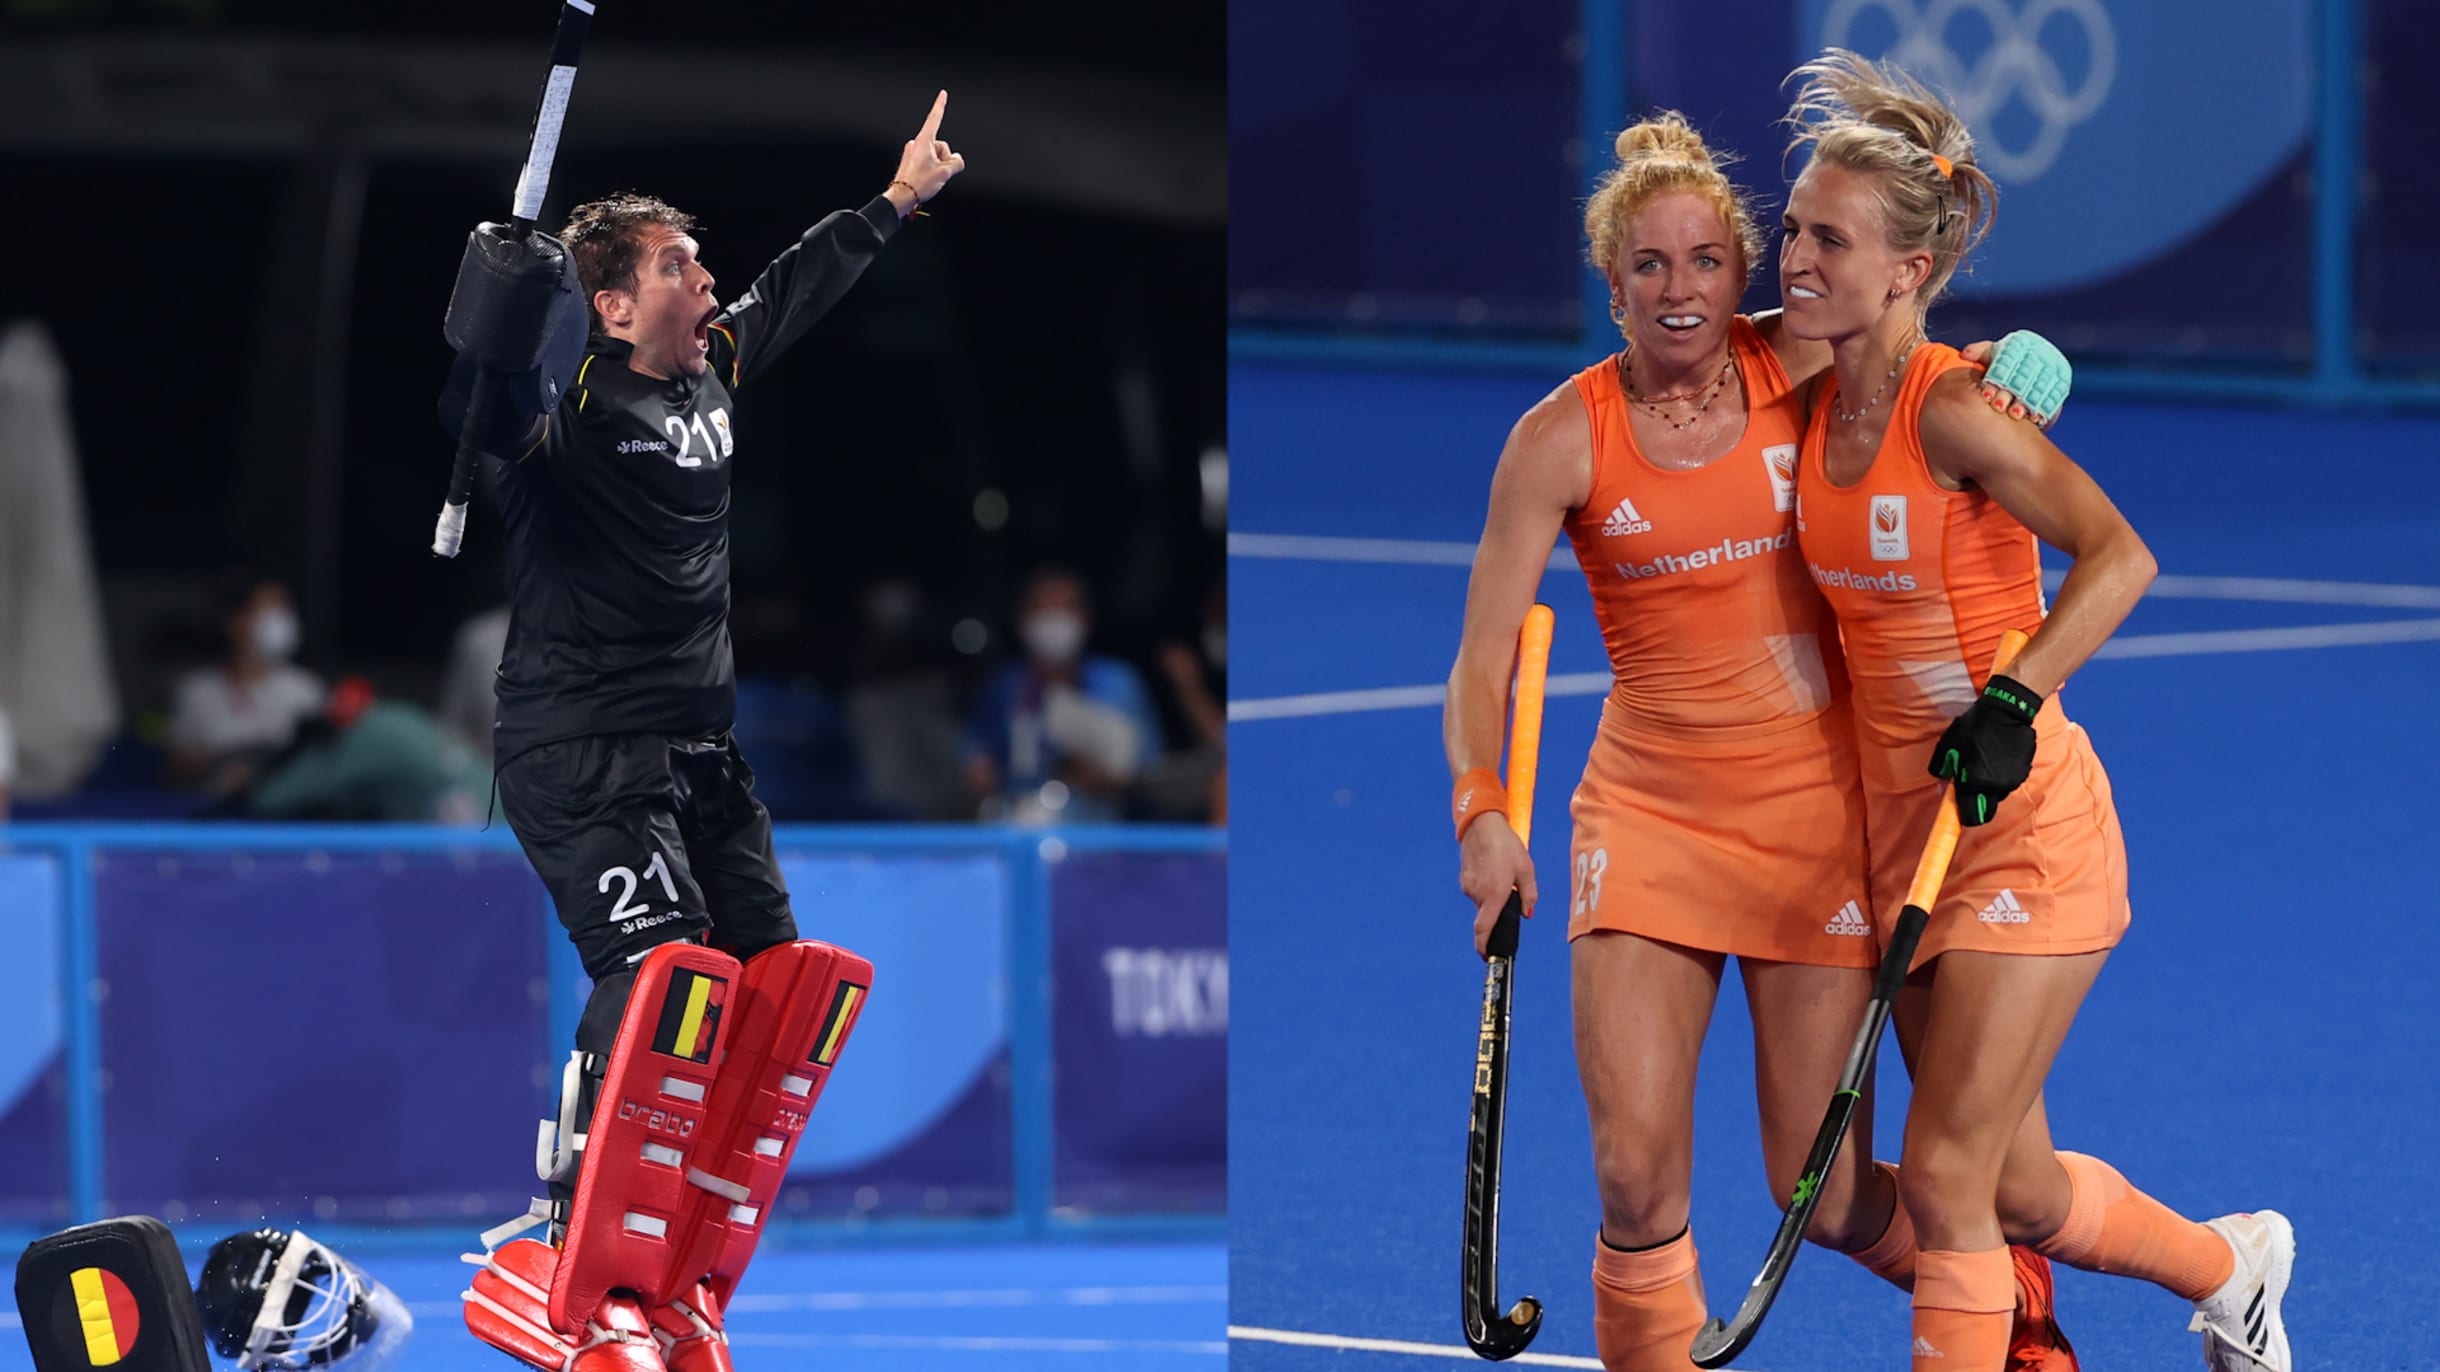 FIH Hockey Pro League: Netherlands defeat Argentina 5-2 in the first leg